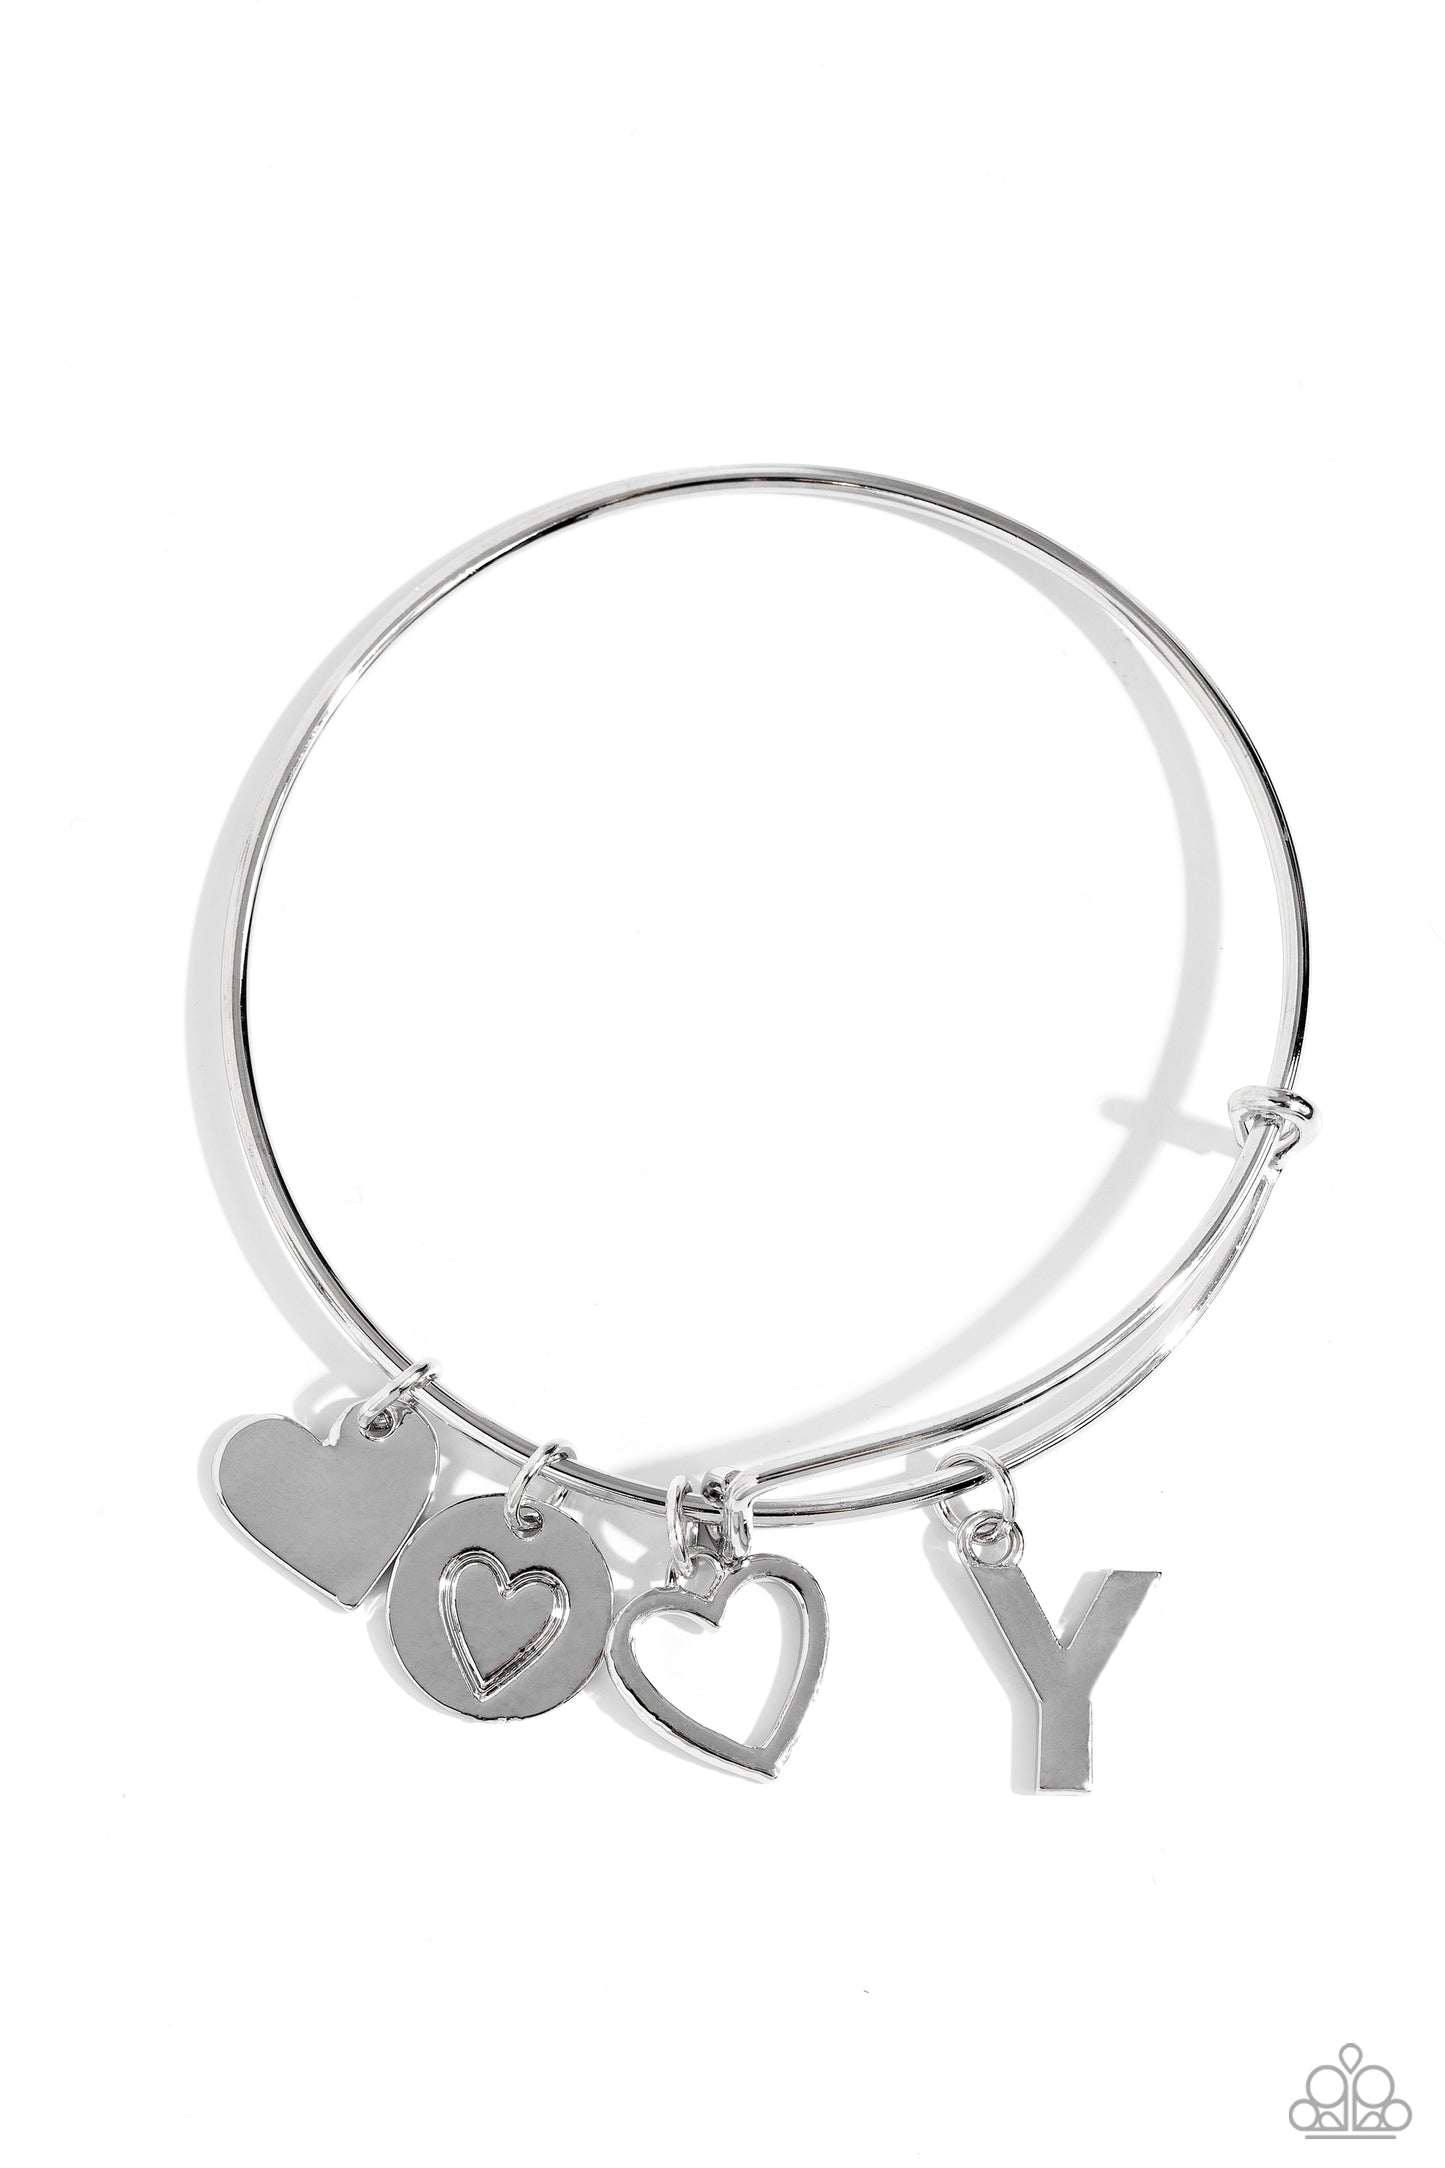 Making It INITIAL Silver "Y" Bangle Bracelet - Paparazzi Accessories  Featuring shiny silver, airy, and stamped finishes, a mismatched collection of dainty heart charms, and the letter "Y" glides along a silver bar fitting at the center of the wrist for a romantic, sentimental flair.  Sold as one individual bracelet.  SKU: P9BA-SVXX-209XX